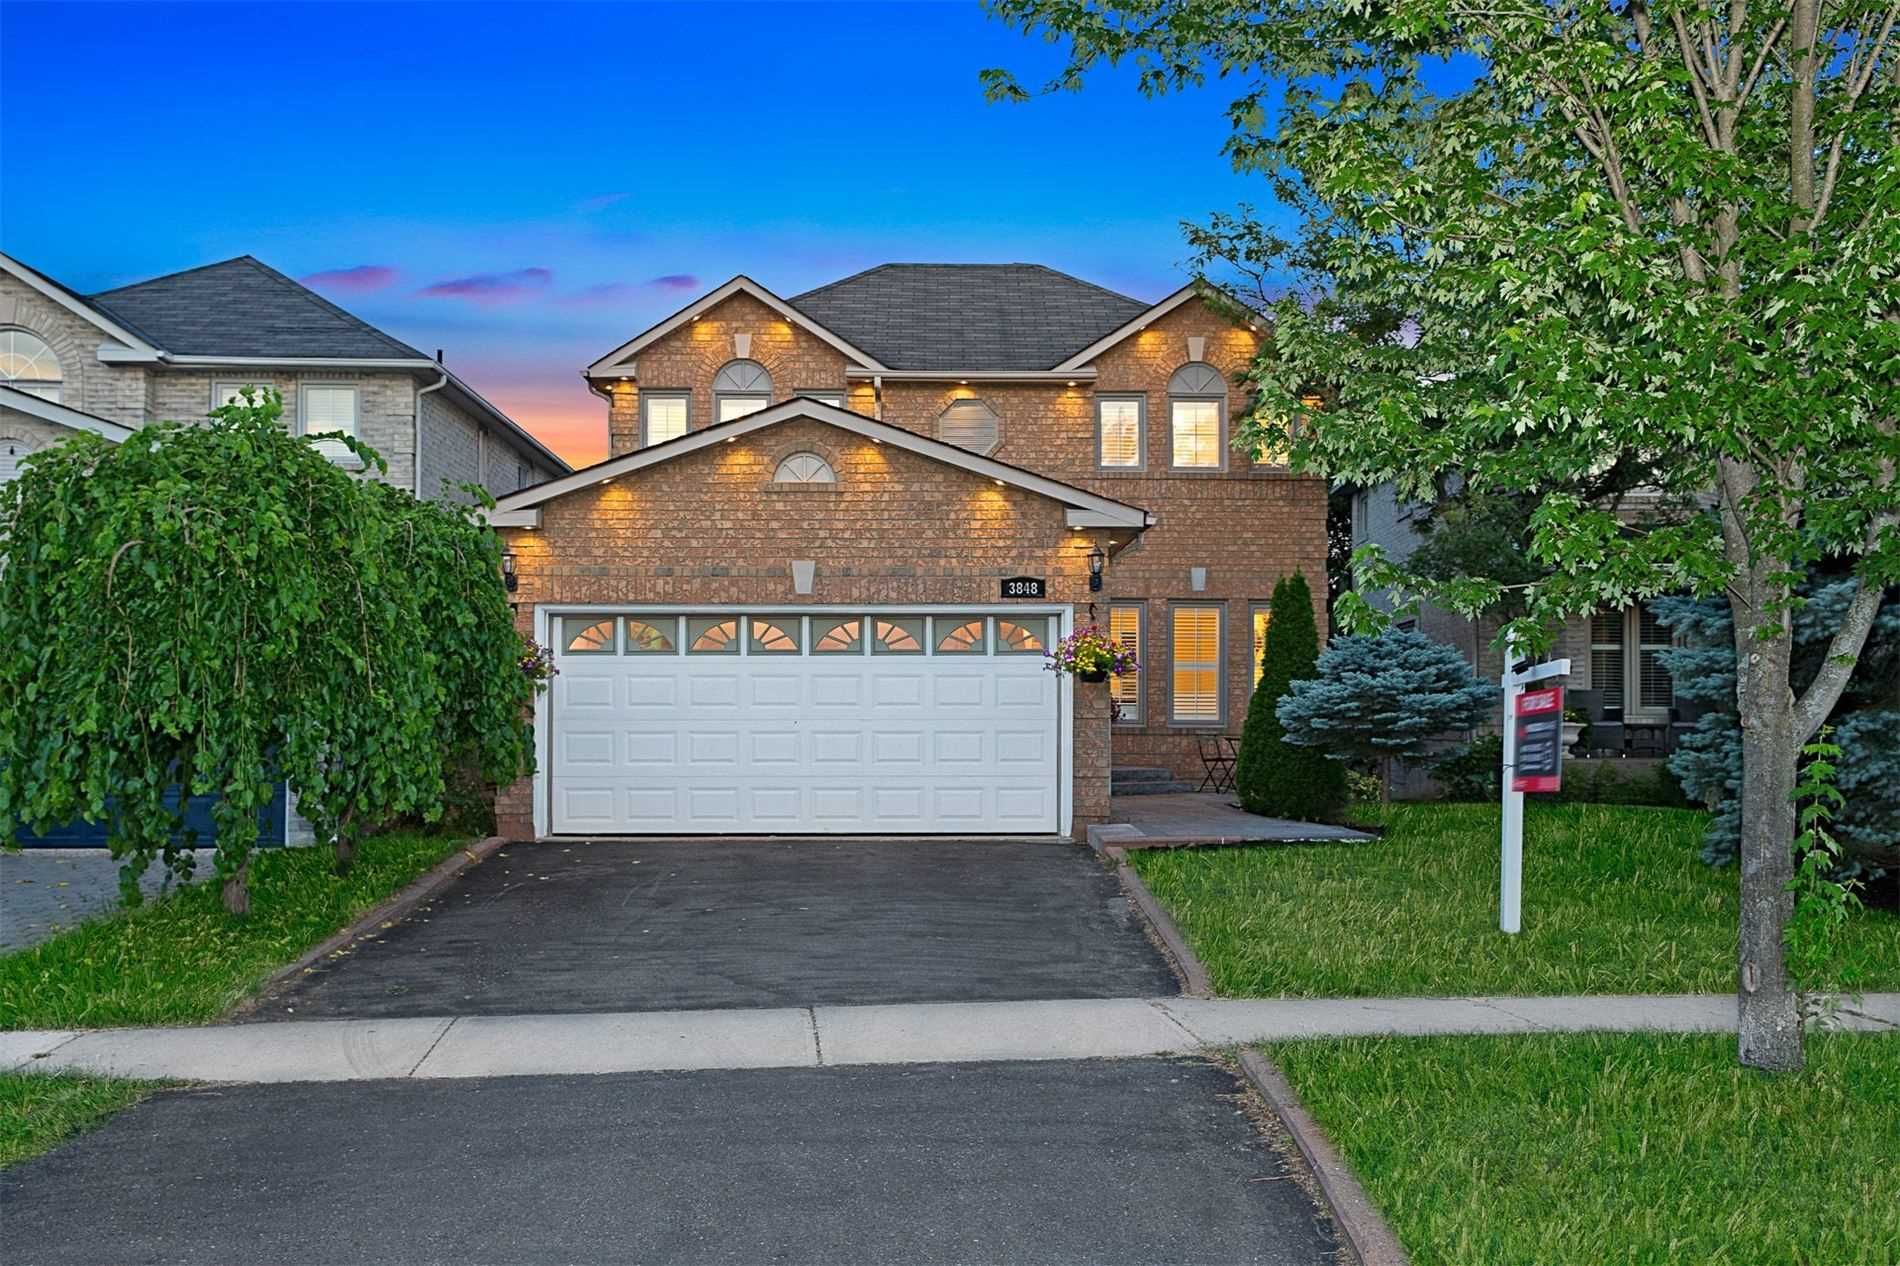 Main Photo: 3848 Periwinkle Crescent in Mississauga: Lisgar House (2-Storey) for sale : MLS®# W4819537